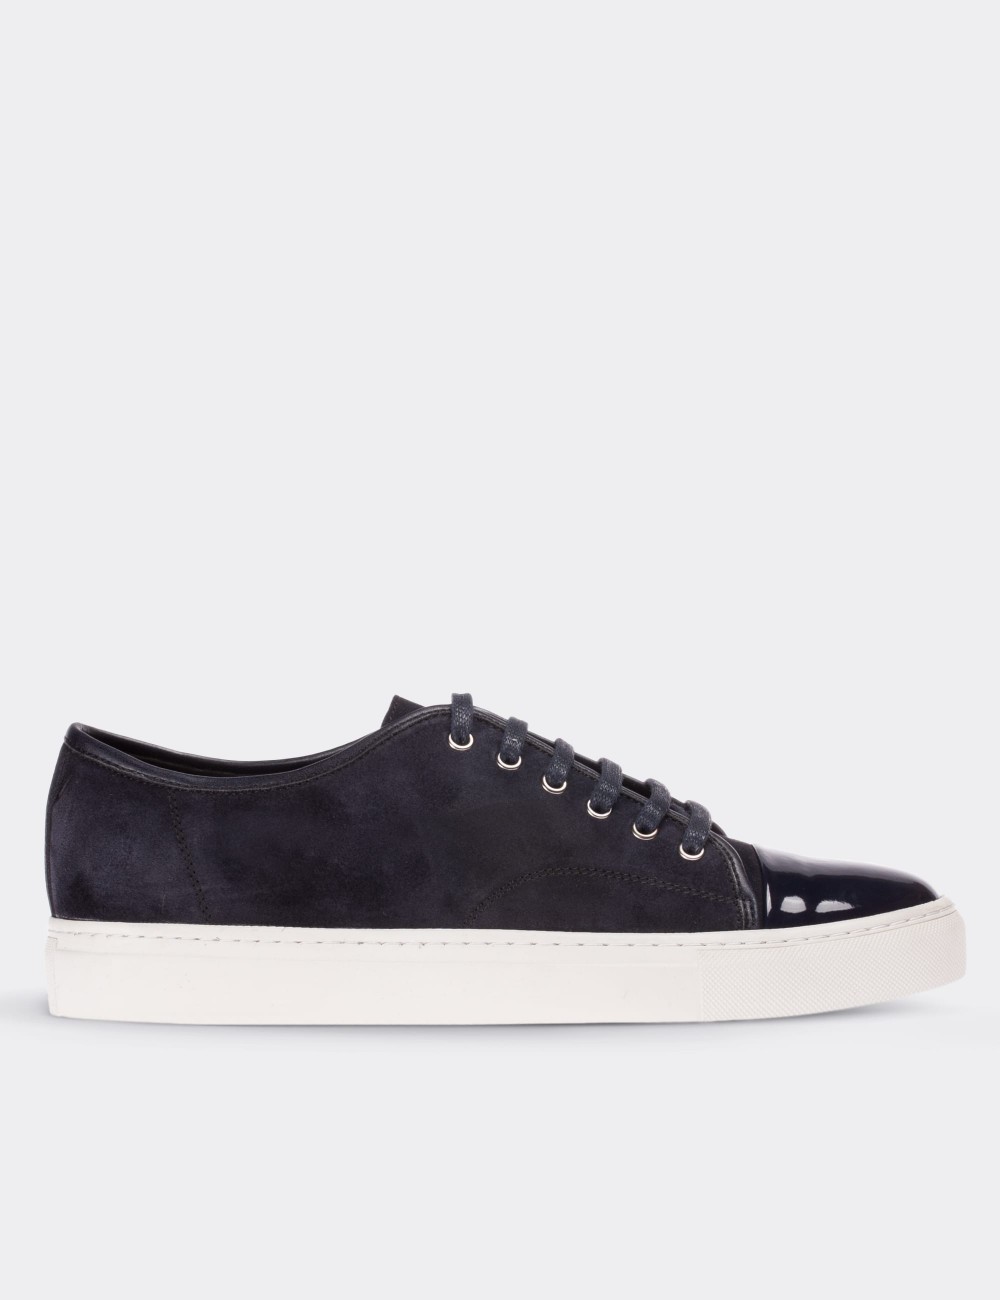 Navy Suede Leather  Sneakers - 01683MLCVC02